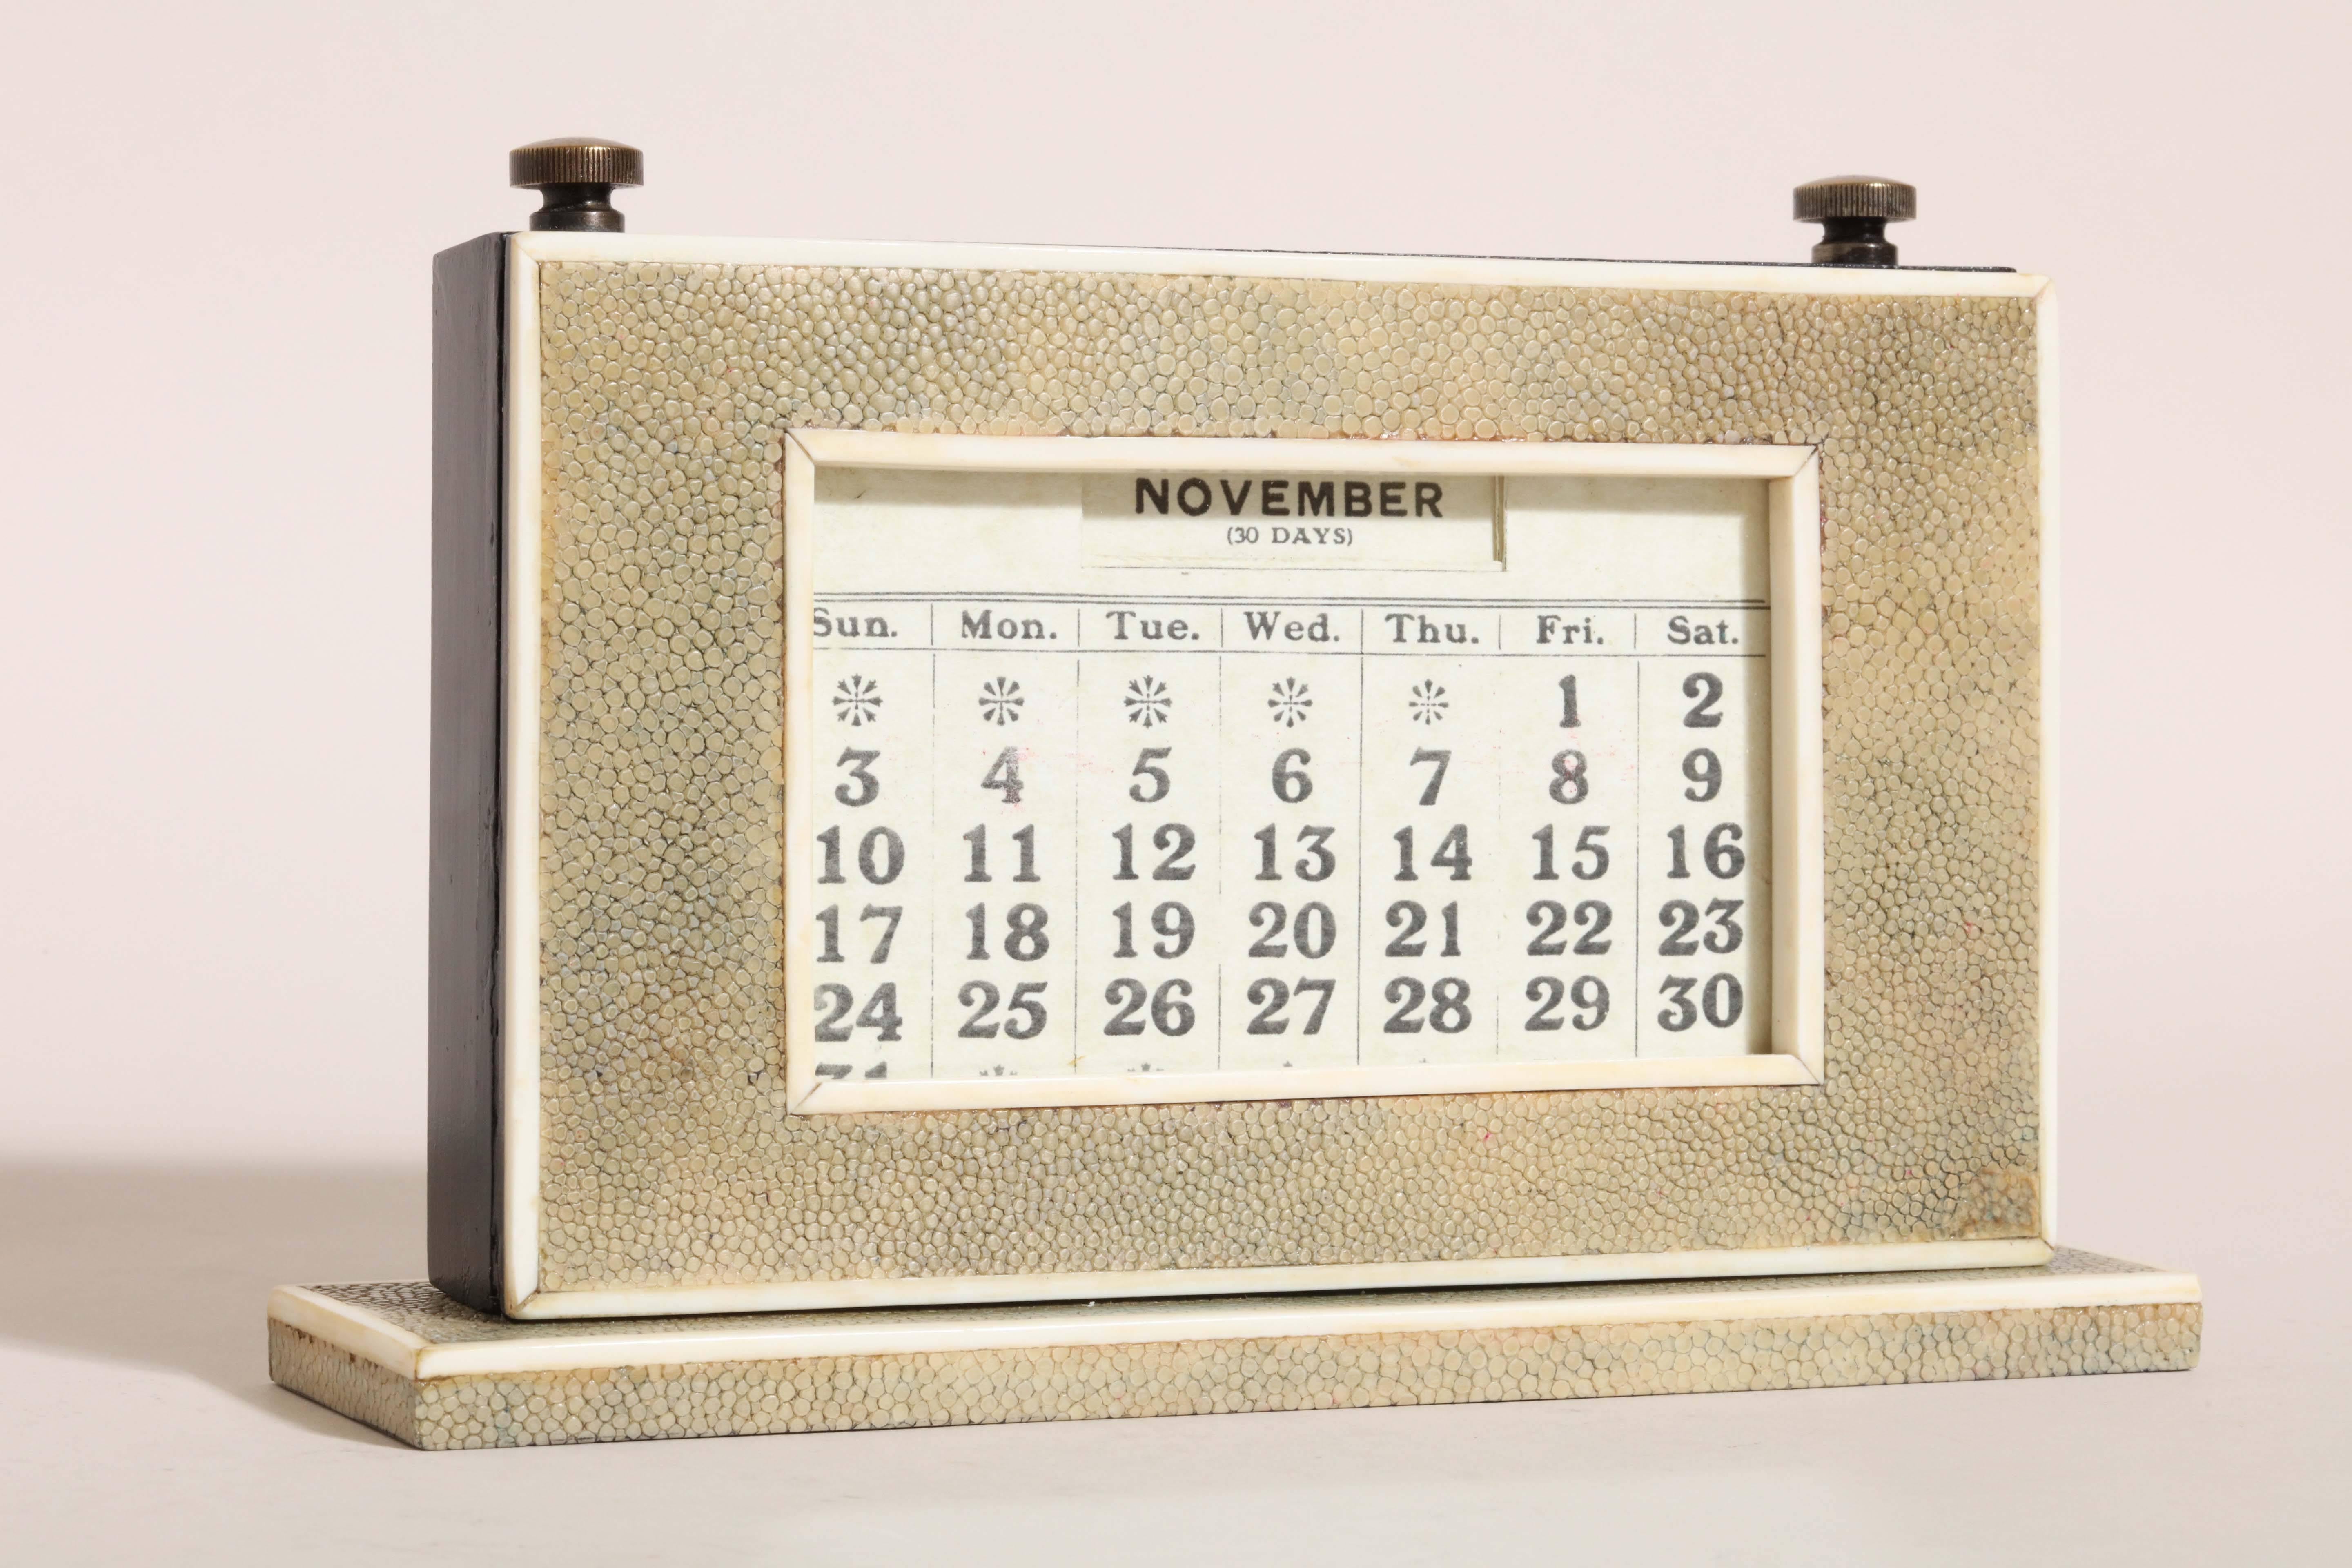 Wooden calendar covered in beige (with hints of blue) shagreen with bone banding around the base, the outside frame and the window. Has door in back to change the month cards. All cards are present.